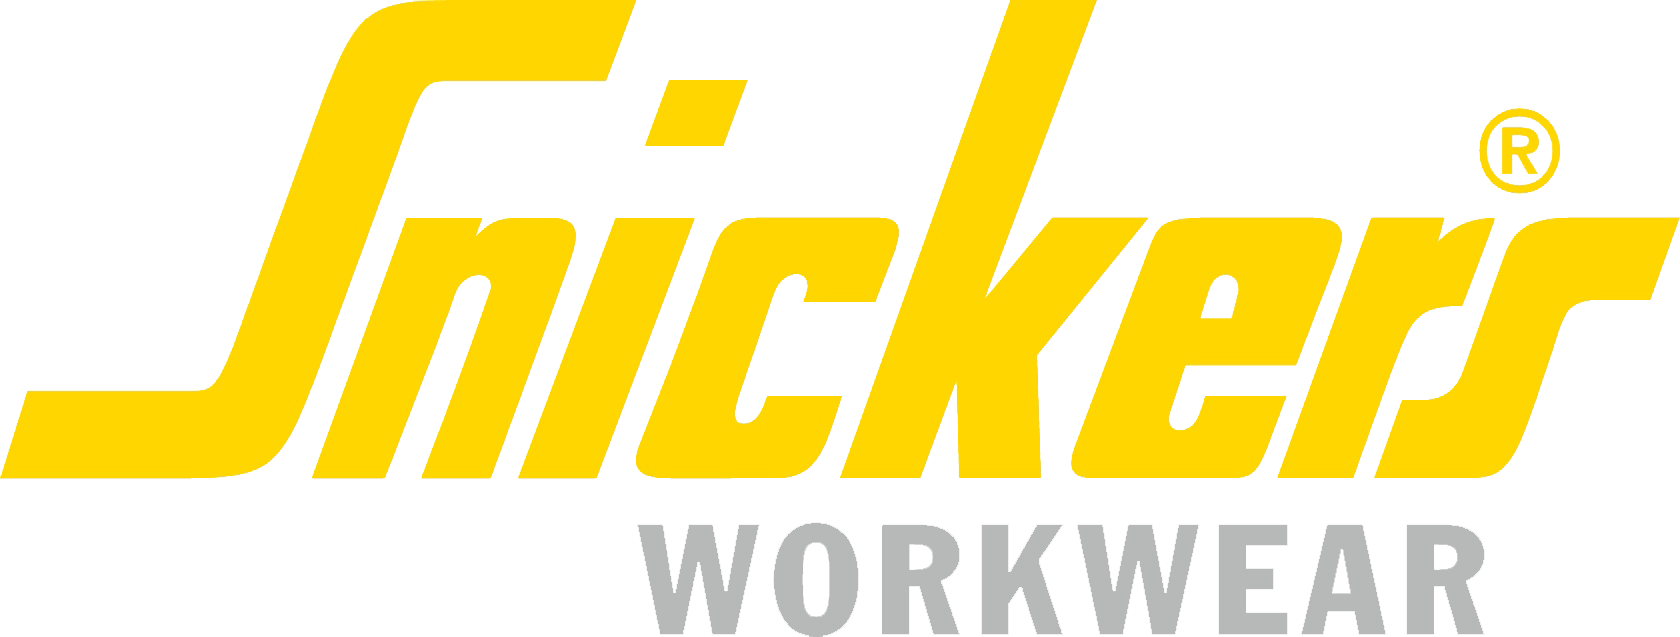 SNICKERS WORKWEAR